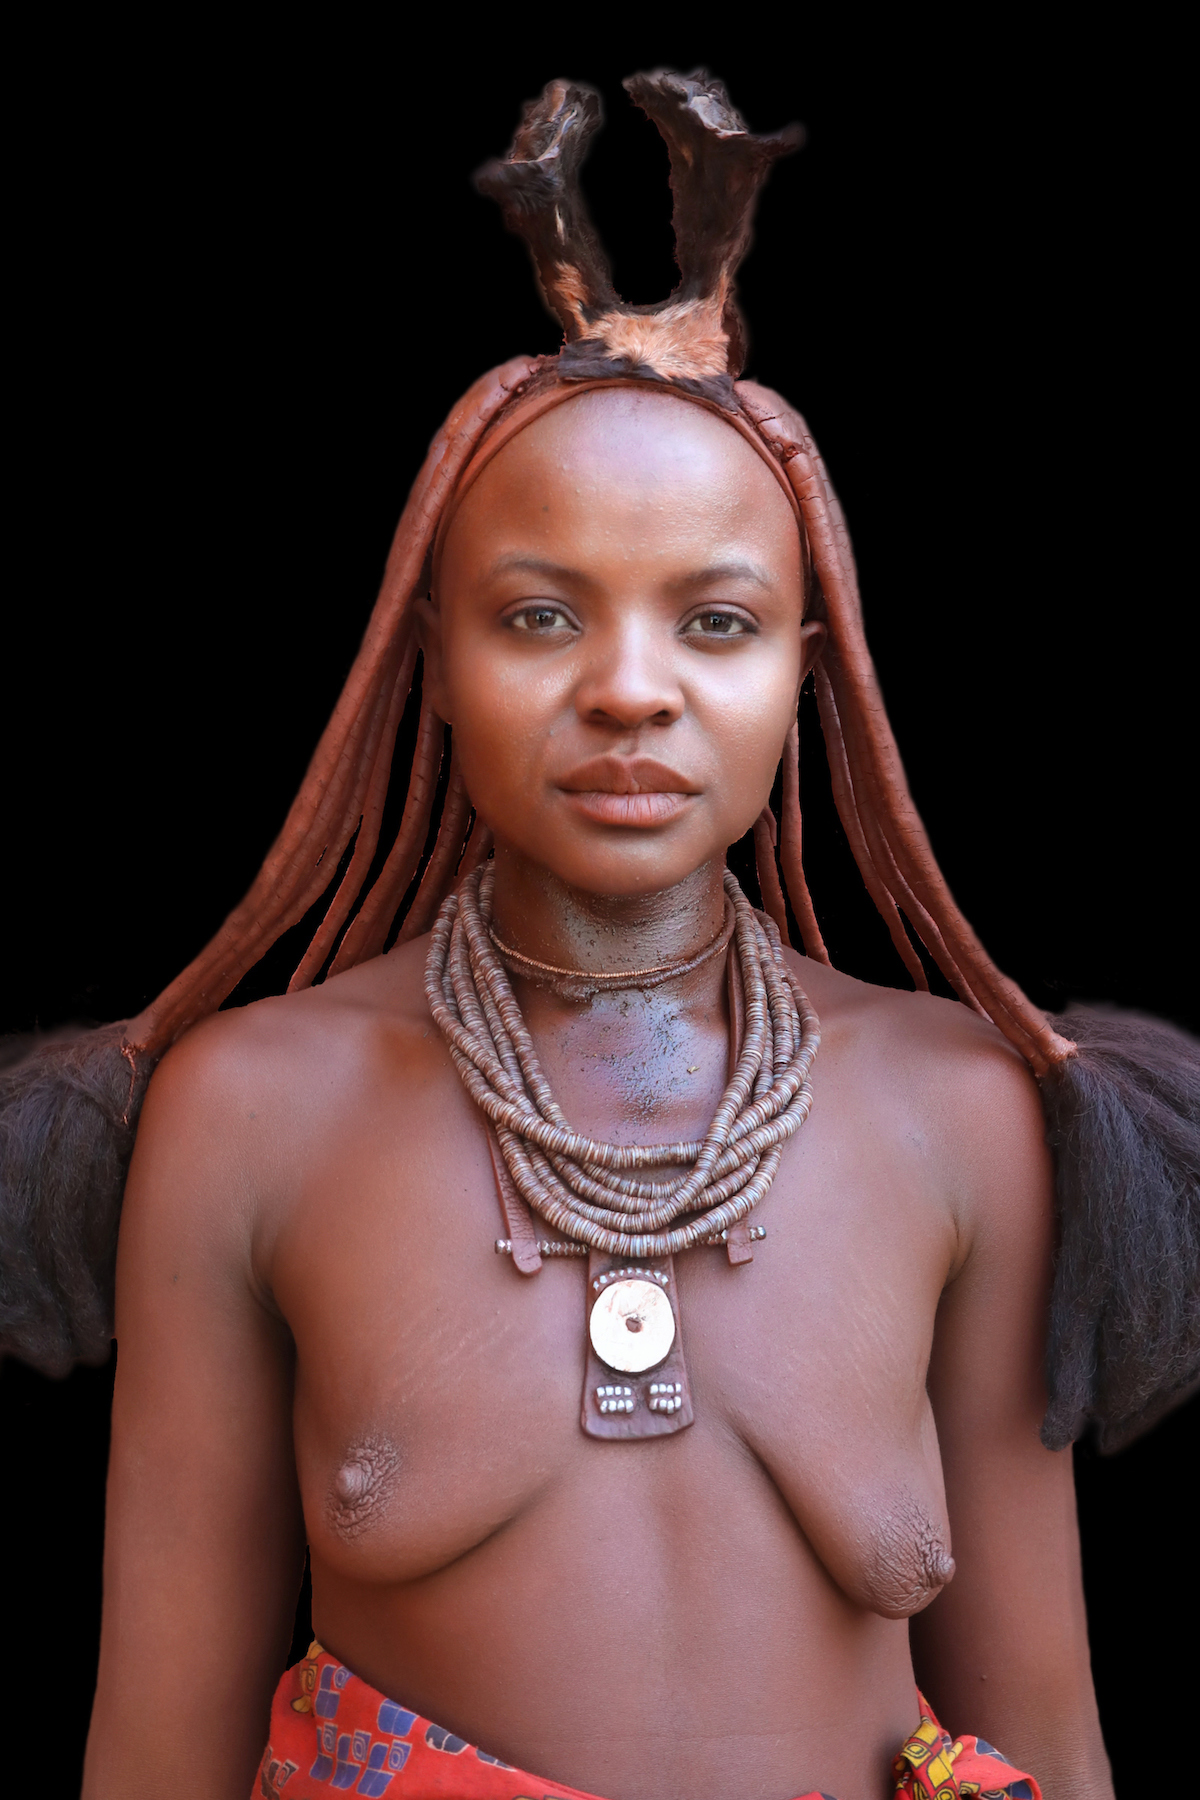 Wild Images photo tours in Namibia take you to meet the beautiful Himba people